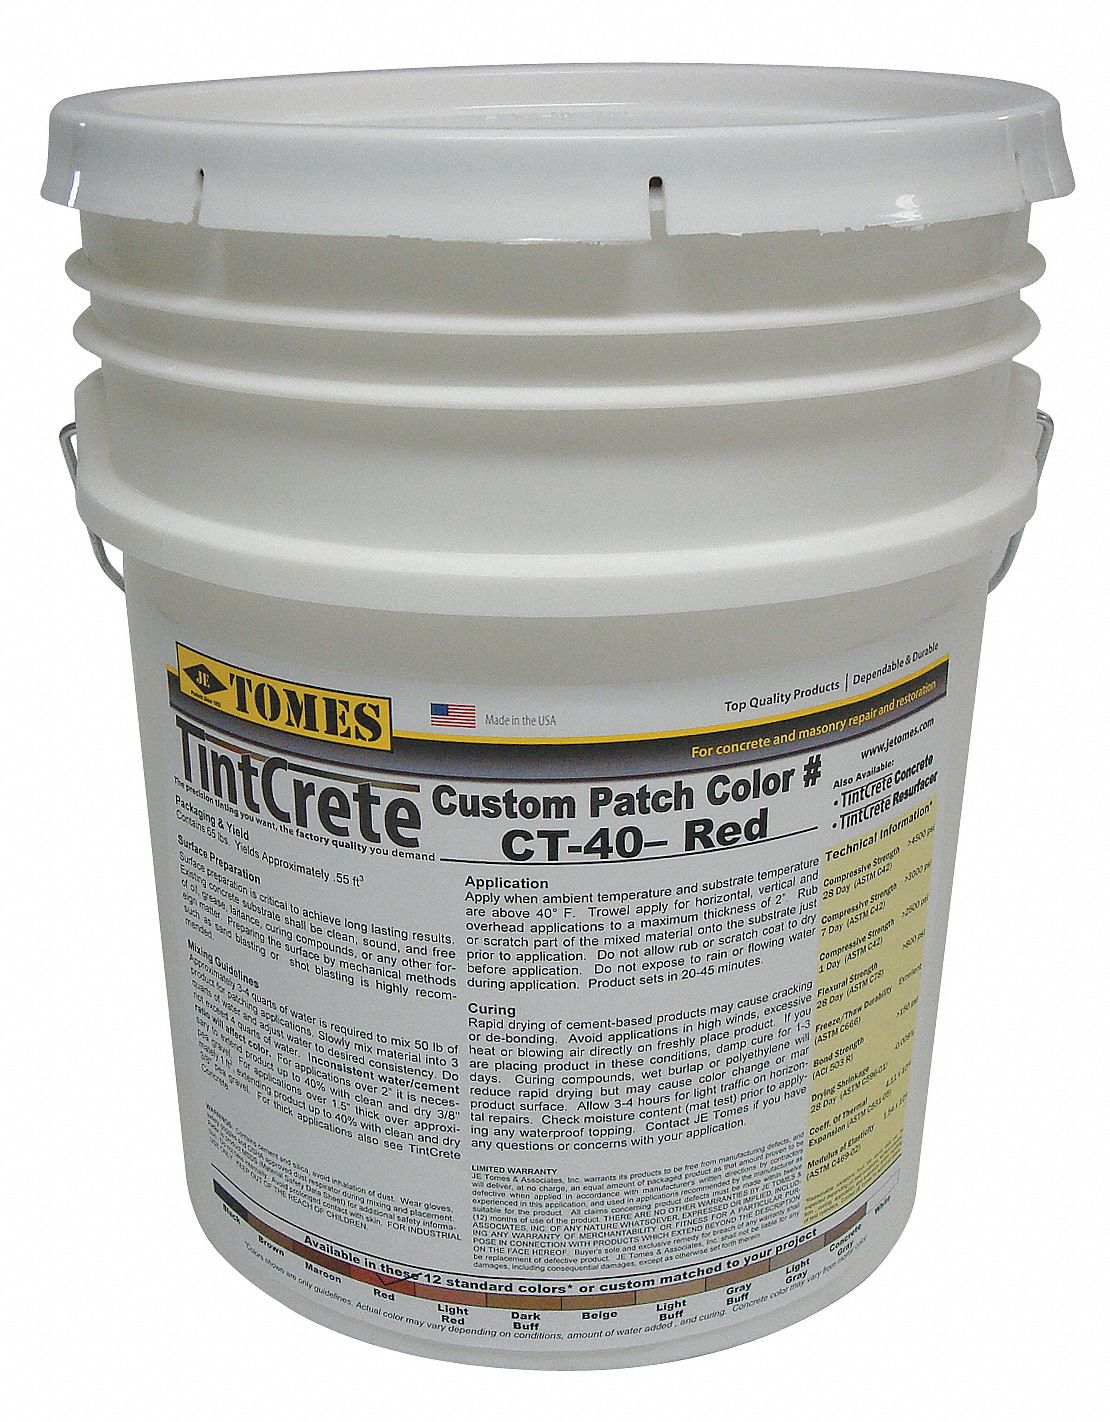 Concrete Patch and Repair: 50 lb, 20 to 40 min Starts to Harden, 3 to 4 hr Full Cure Time